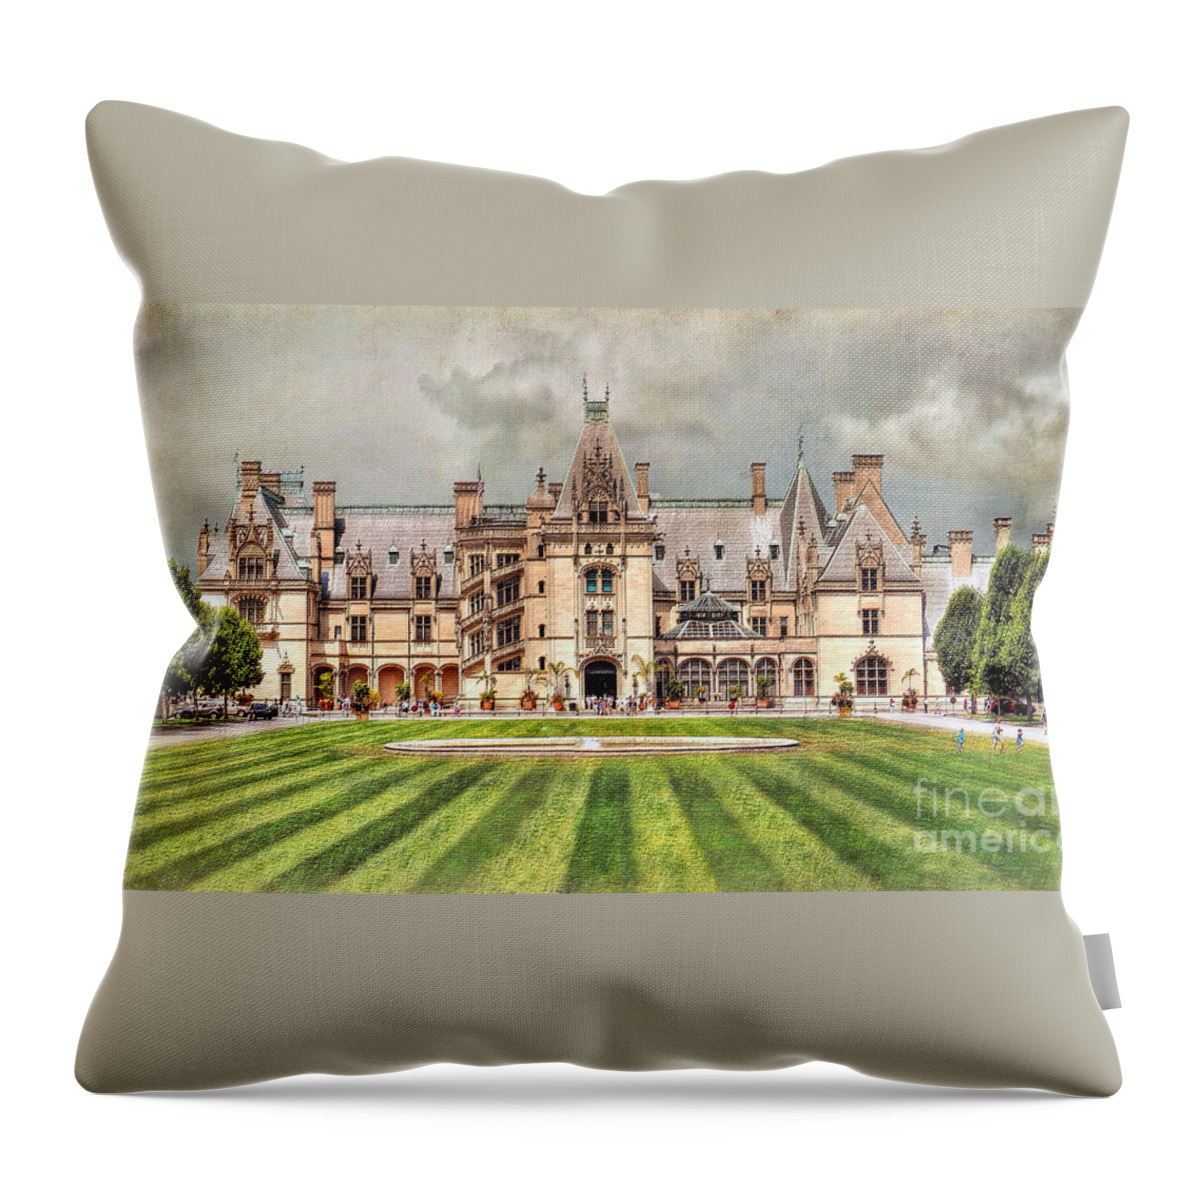 The Biltmore House Throw Pillow featuring the photograph Biltmore House by Savannah Gibbs